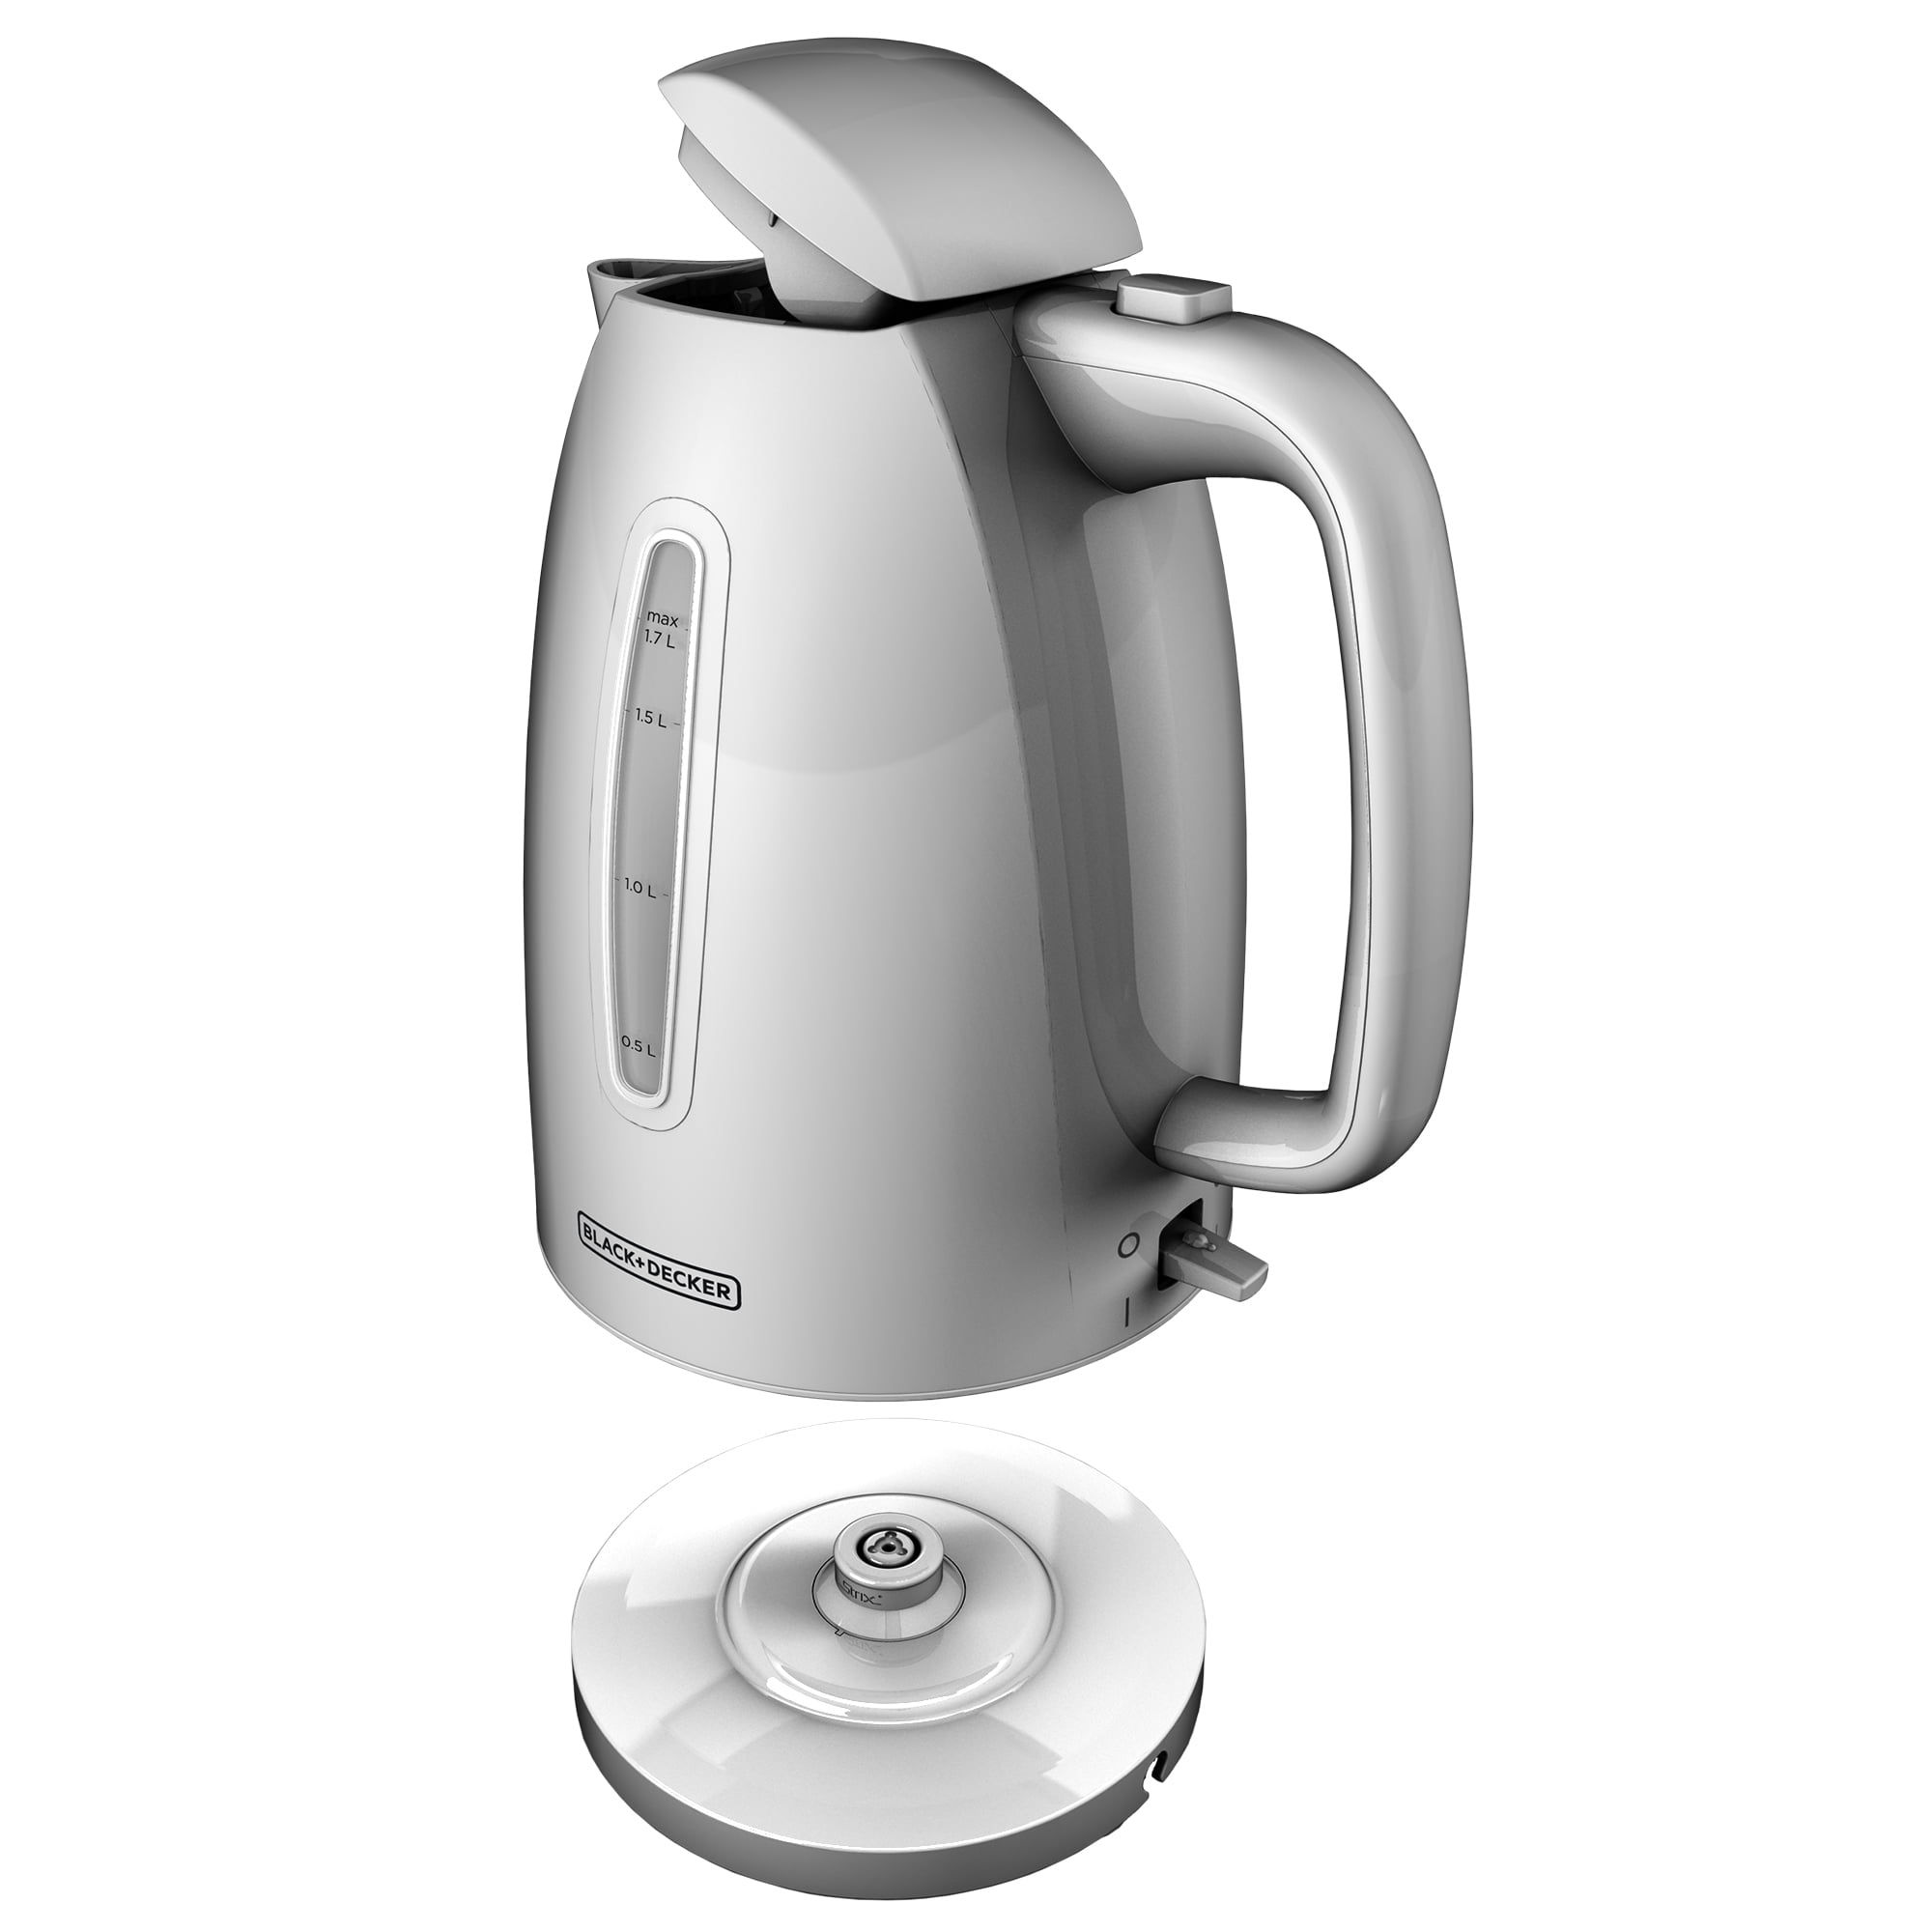 Black and Decker Rapid Boil 7-Cup Electric Kettle Gray $18.48 — Save with  Sydney